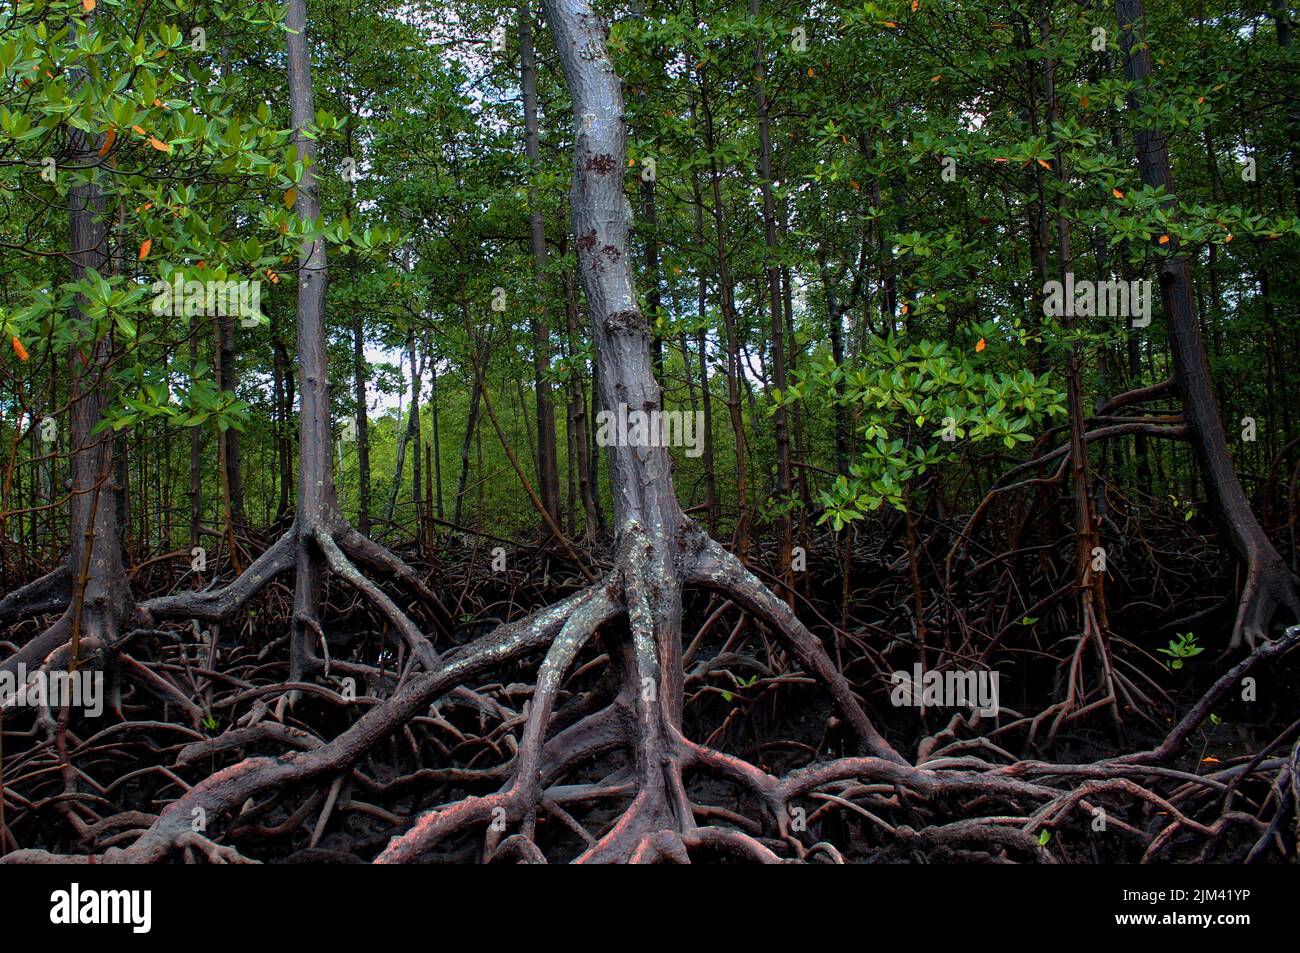 Mangrove forest with vegetation characteristic of this ecosystem, trees with exposed roots and brown stems and green leaves, in Morro de São Paulo, BR. Stock Photo